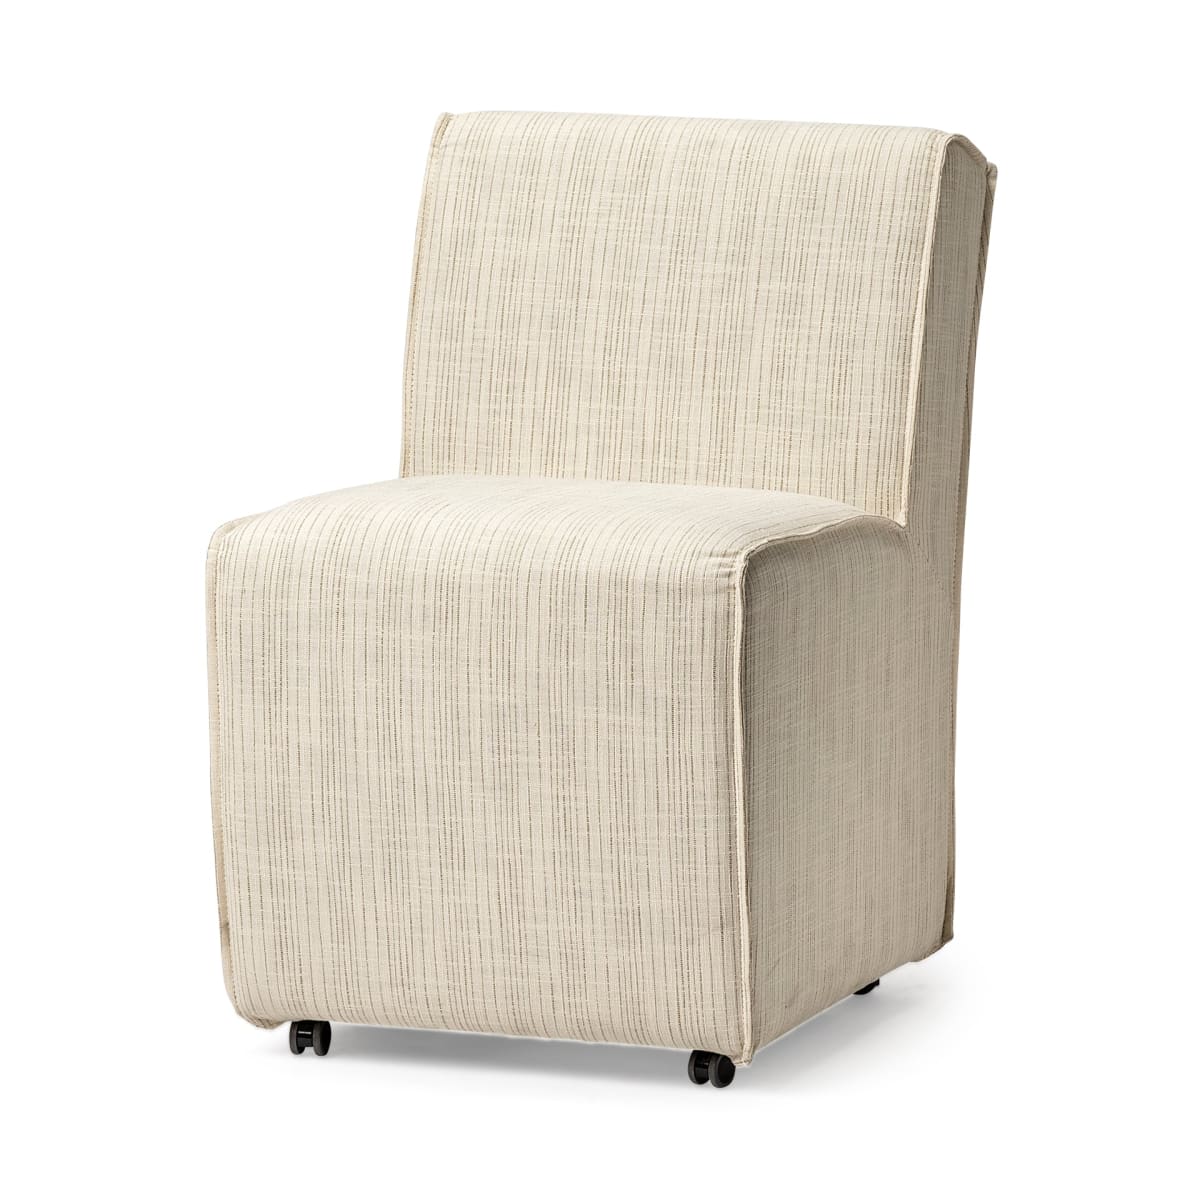 Damon Dining Chair Cream with Taupe Stripe Fabric - dining-chairs